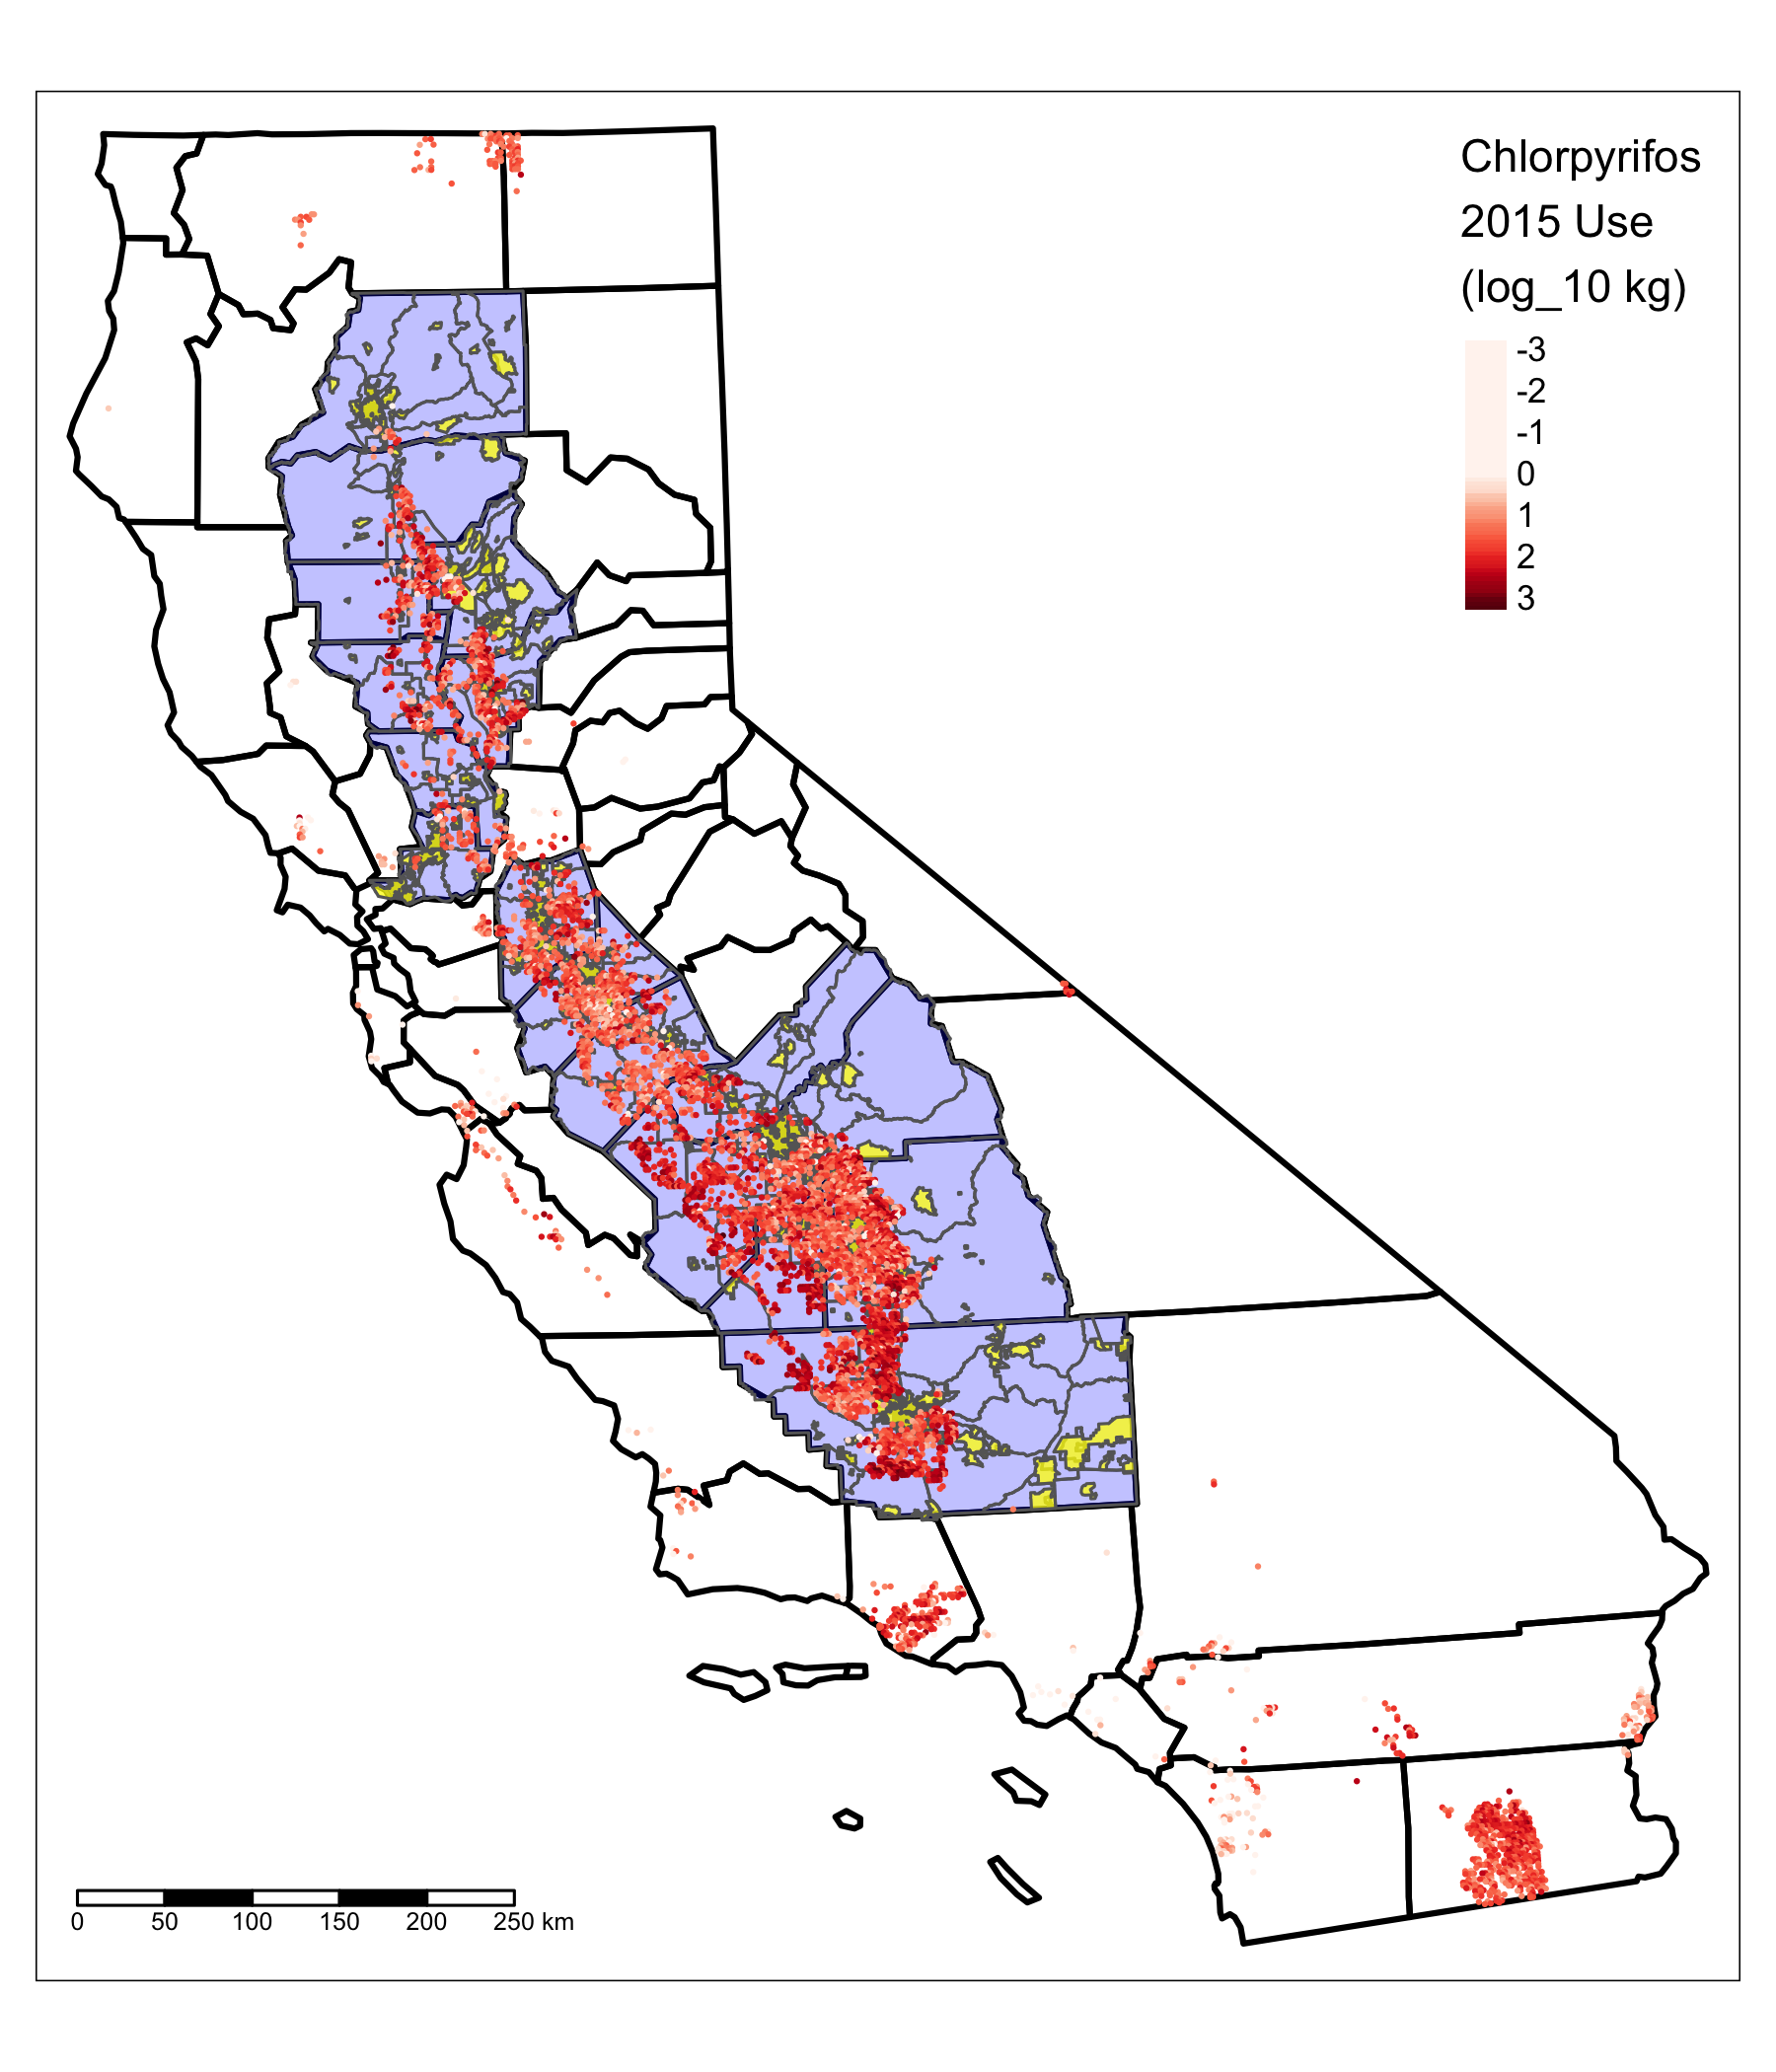 A map of California, showing the study area of the Central Valley in blue. Chlorpyrifos use is indicated by a cloud of redish points; the cloud is densest in the San Joaquin Valley.